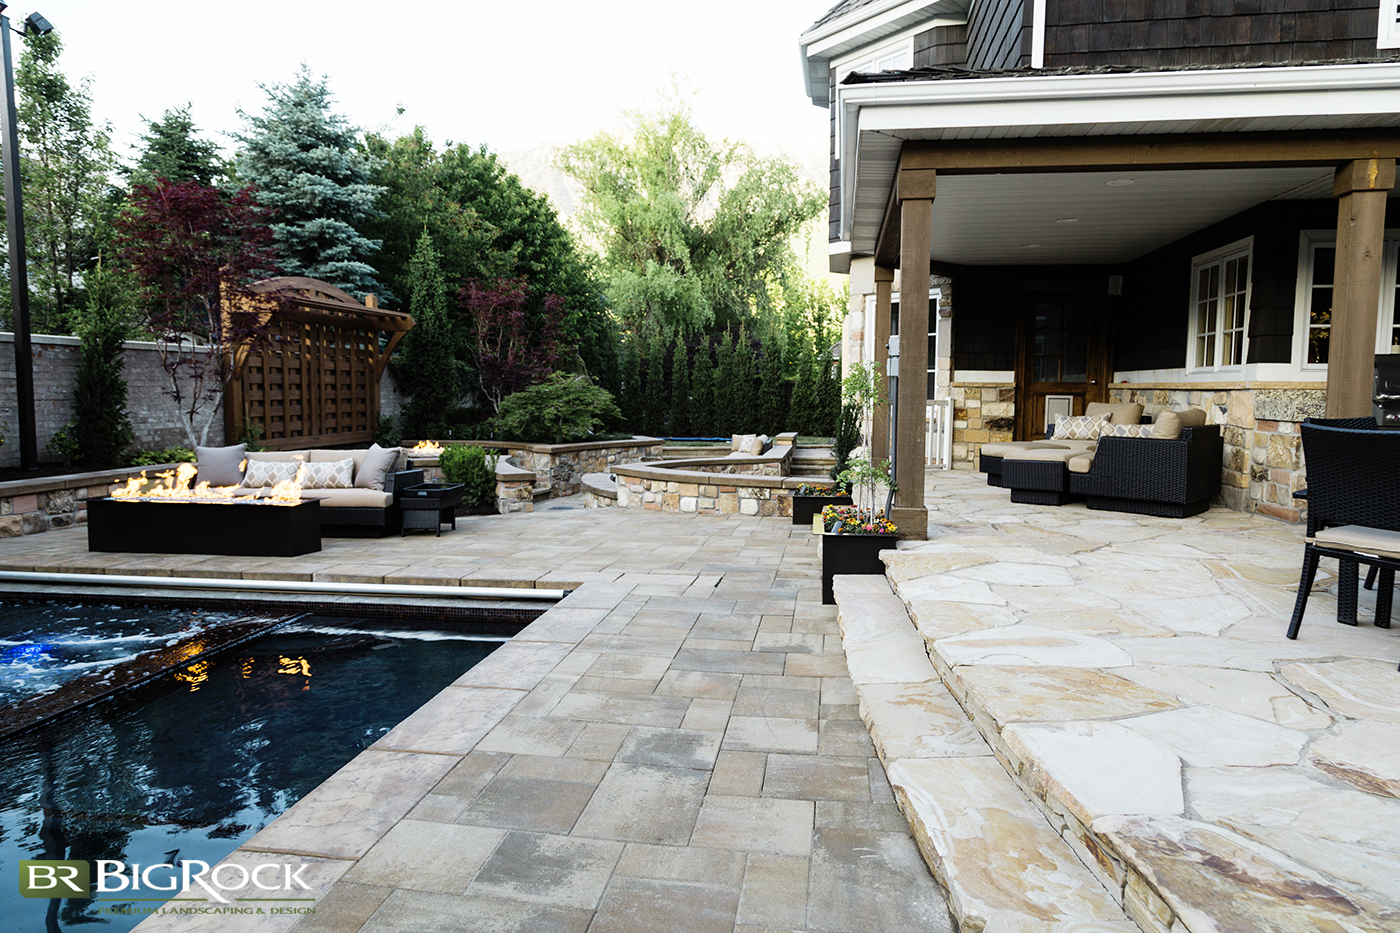 Mix natural shape stones with geometric patterns of stone pavers to break up harsh lines and create visual interest in your landscape design.